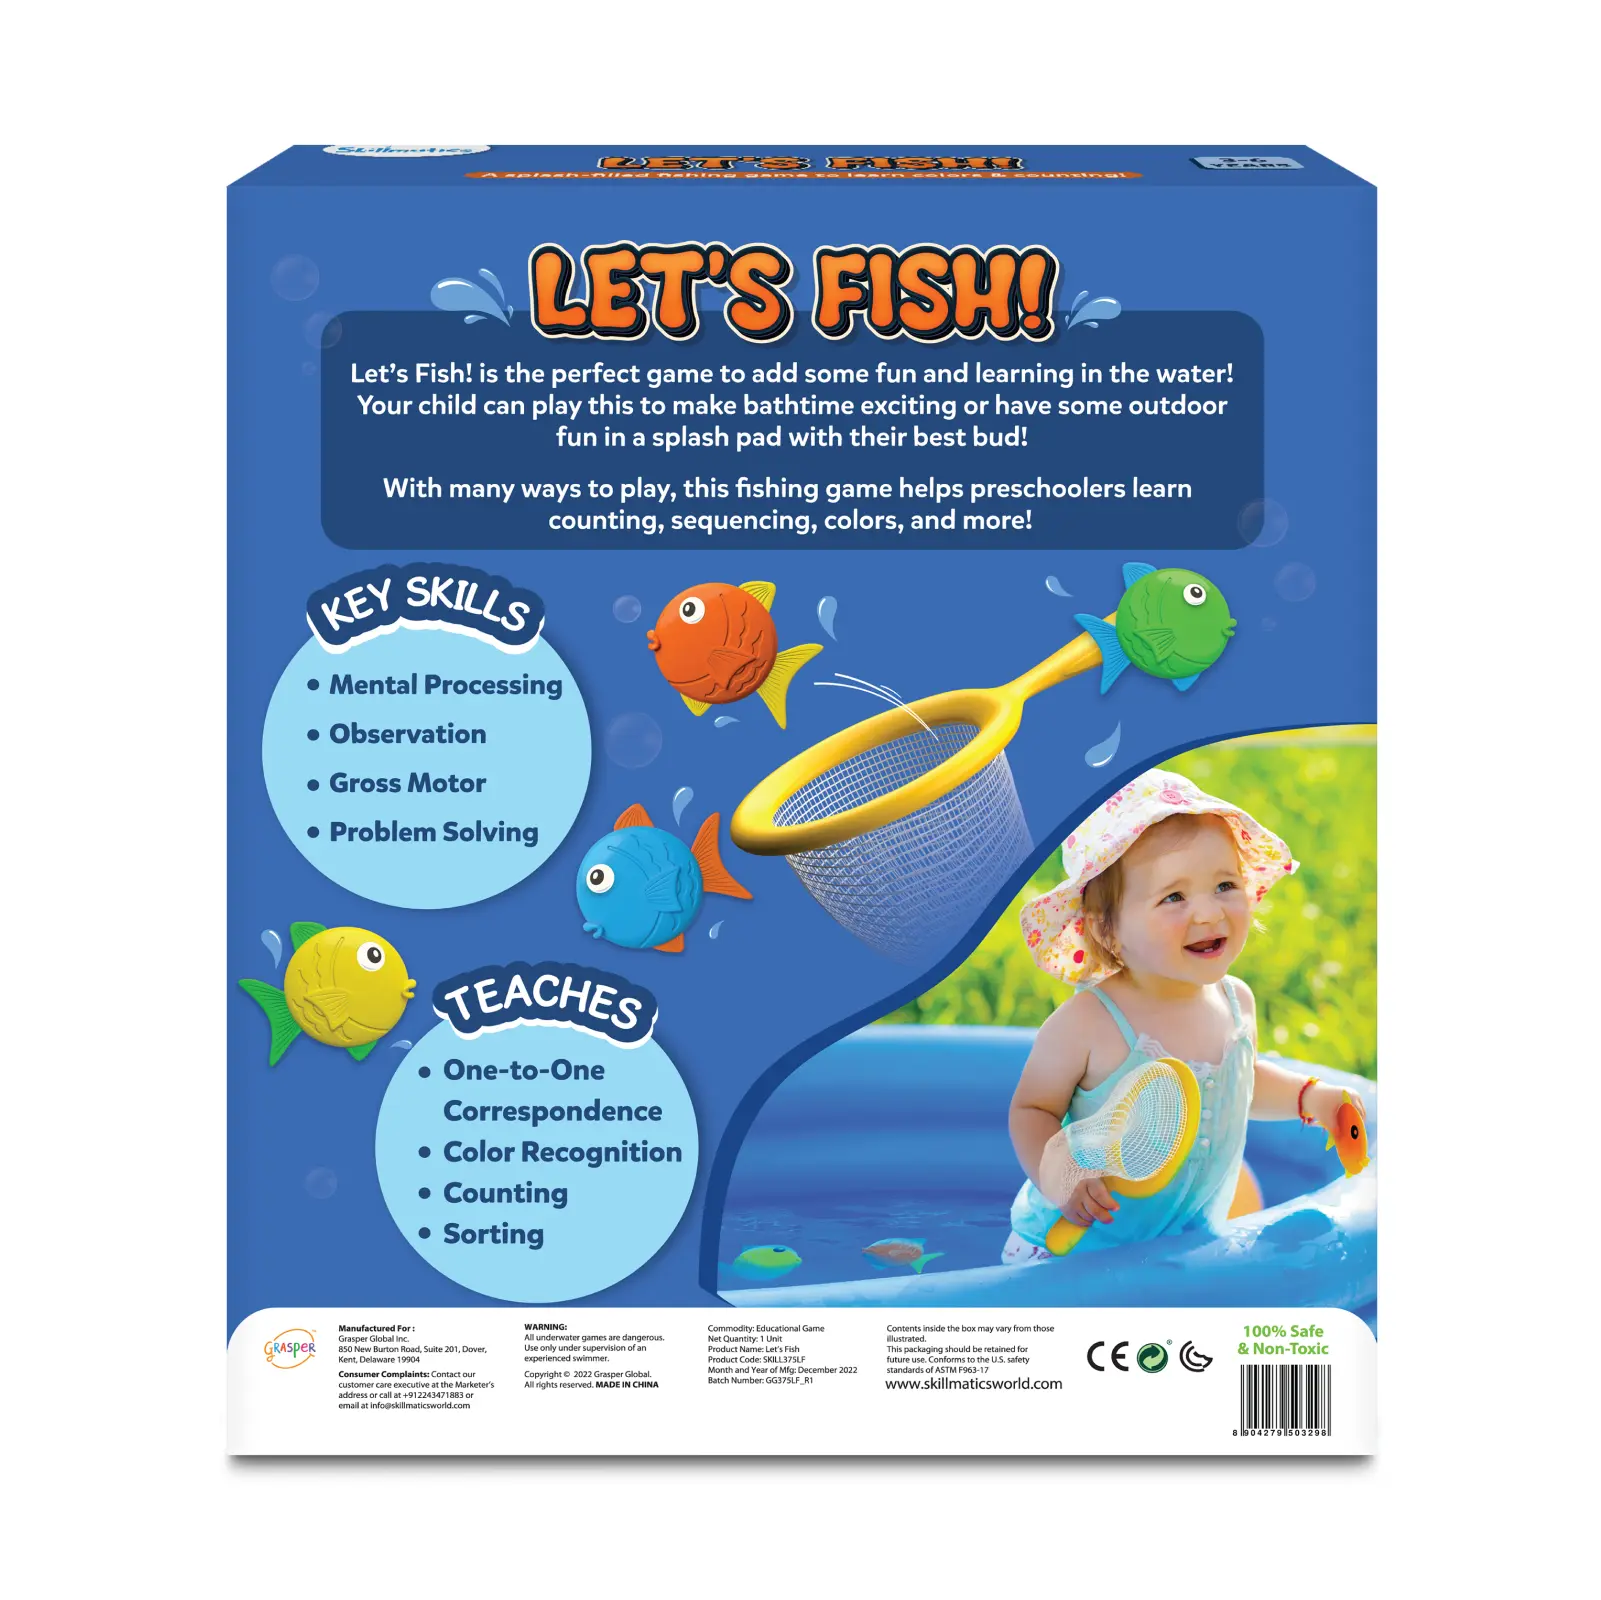 Skillmatics Outdoor & Bath Toys - Let's Fish, Fishing Game, Toddler Toys, Learn Colors & Counting, Pool Toys for Kids, Gifts for Boys & Girls Ages 3